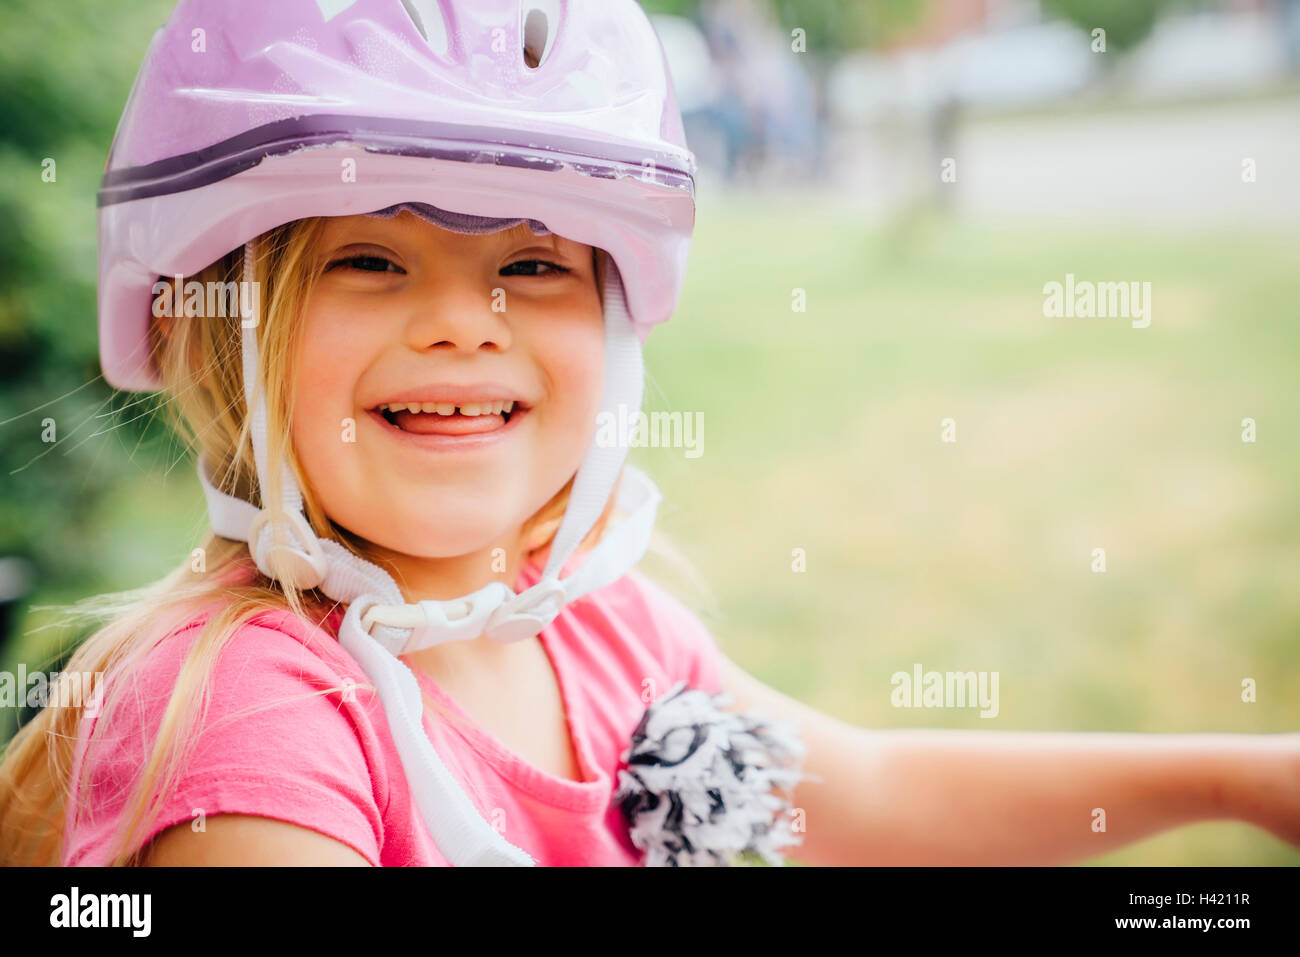 Smiling Mixed Race girl wearing helmet Banque D'Images